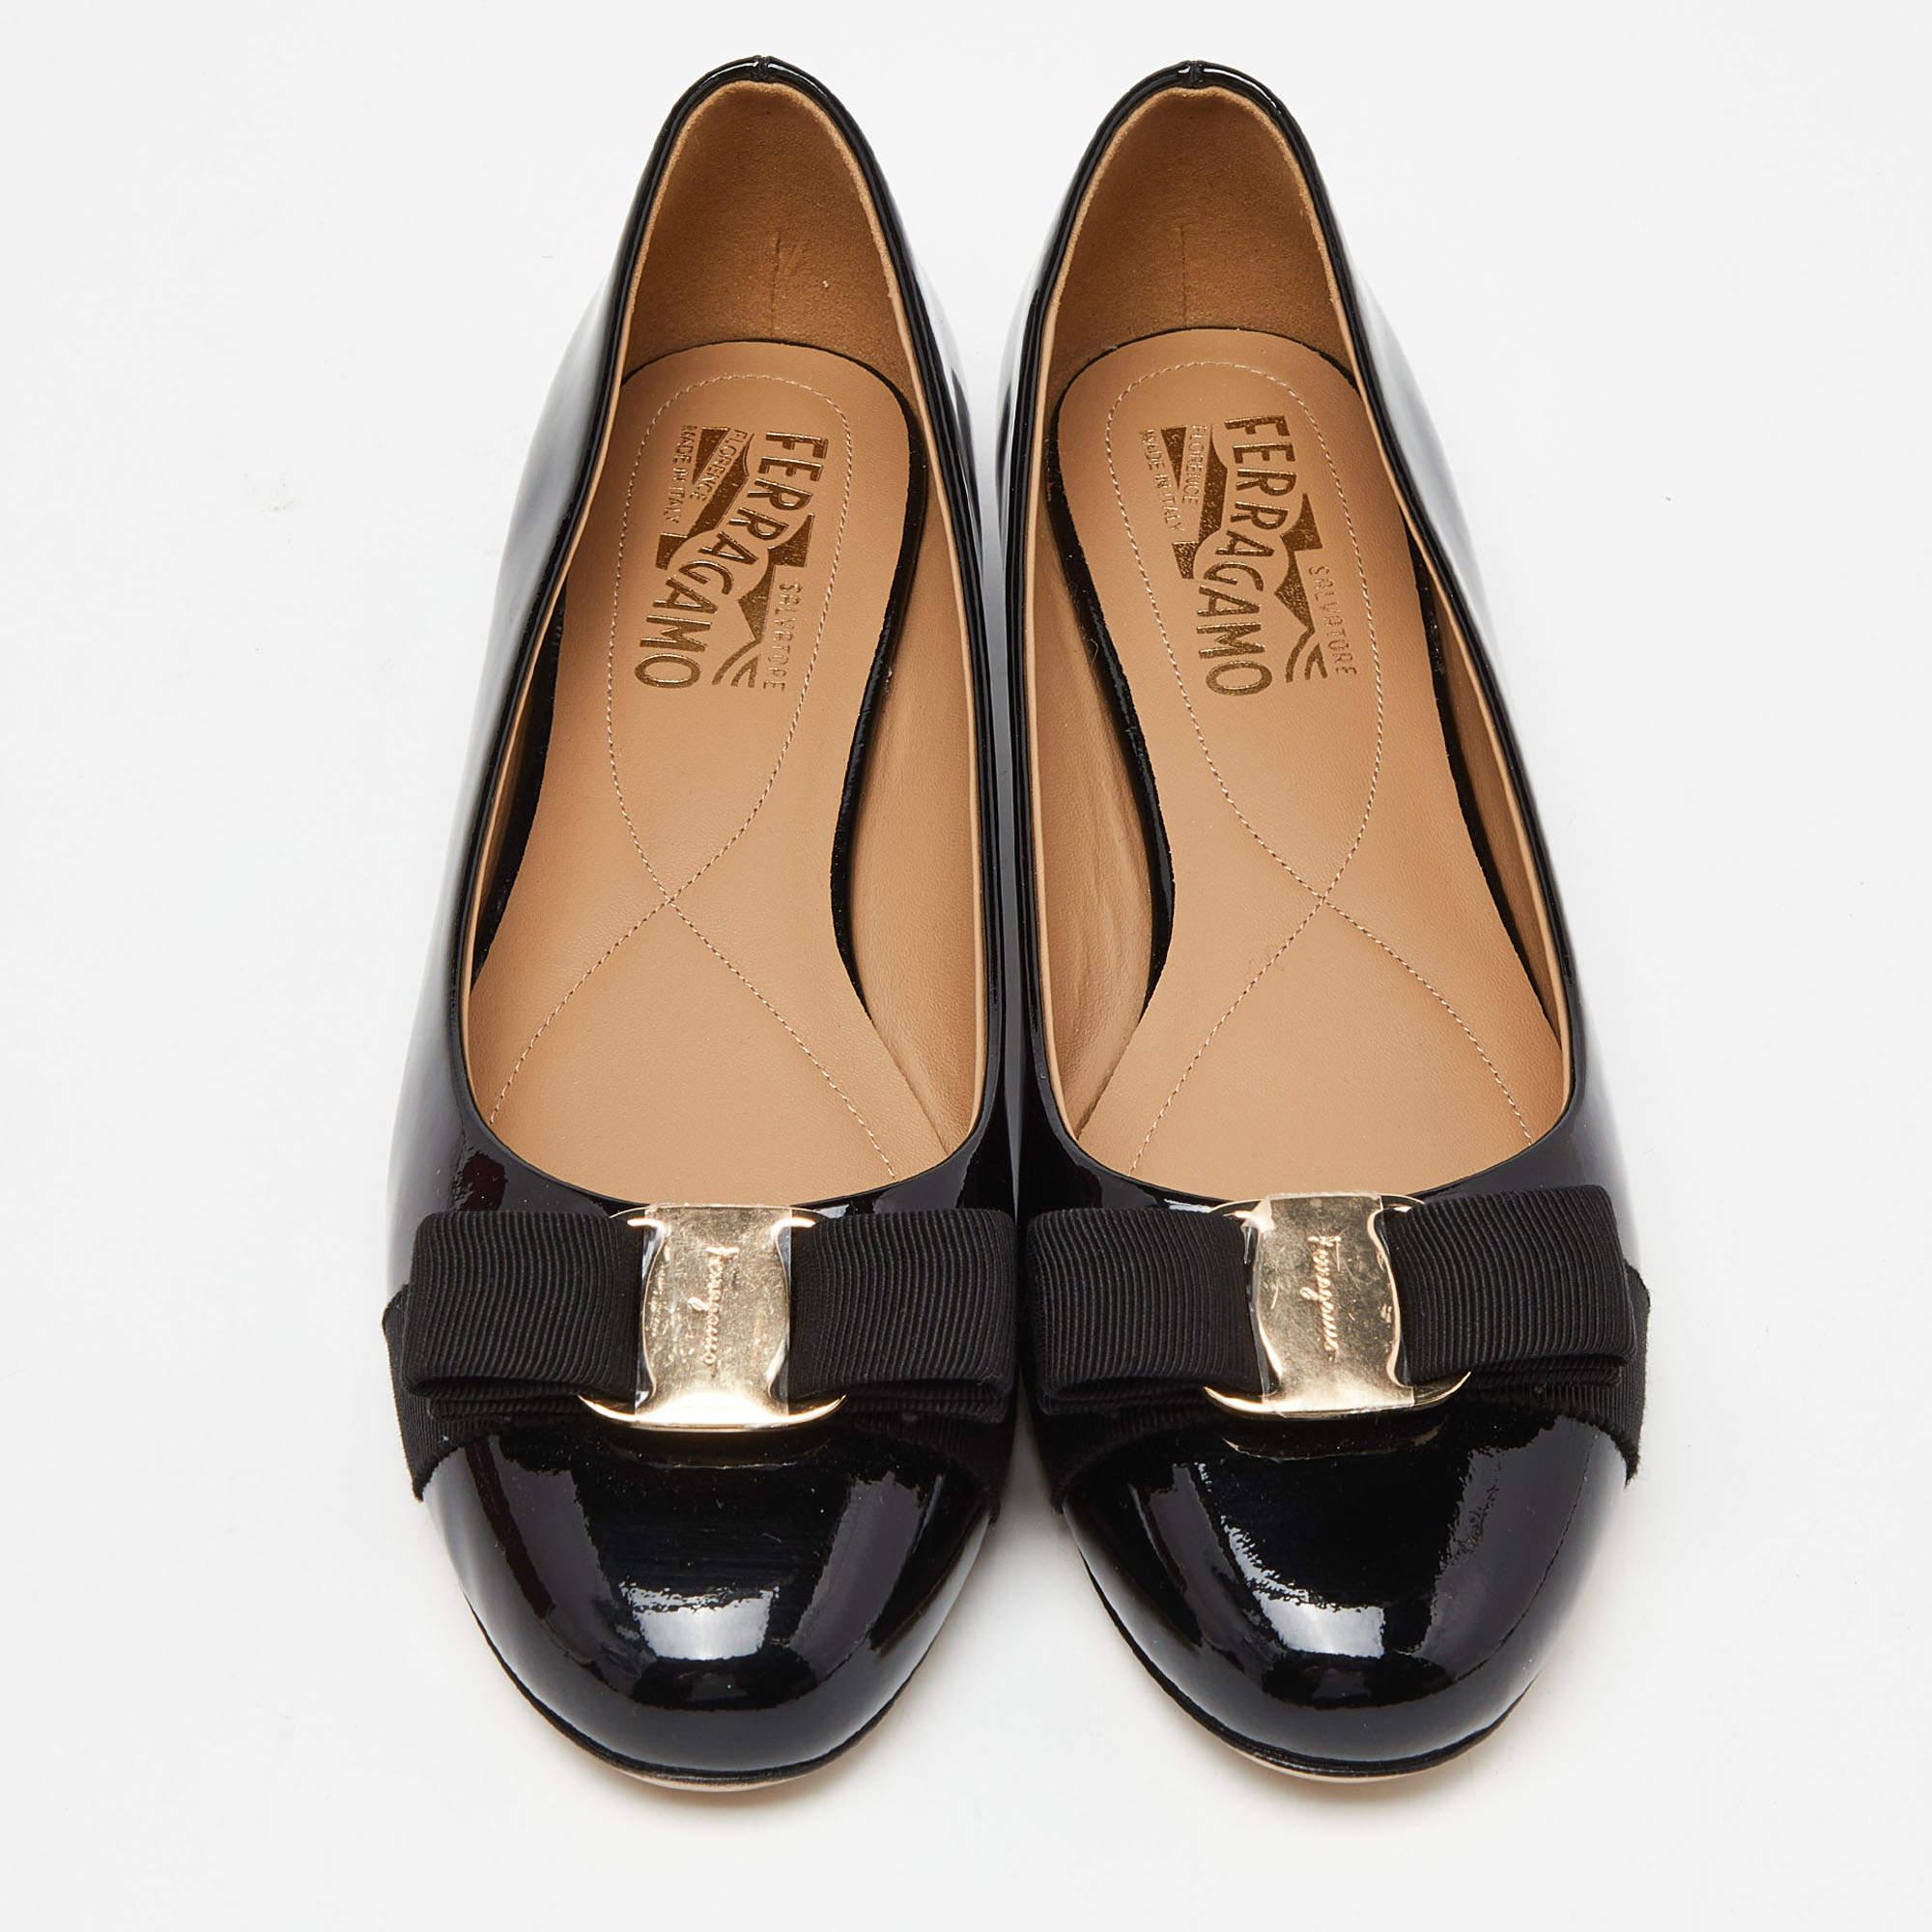 These well-crafted designer ballet flats have got you covered for all-day plans. They come in a versatile design, and they look great on the feet.

Includes
Original Dustbag, Original Box